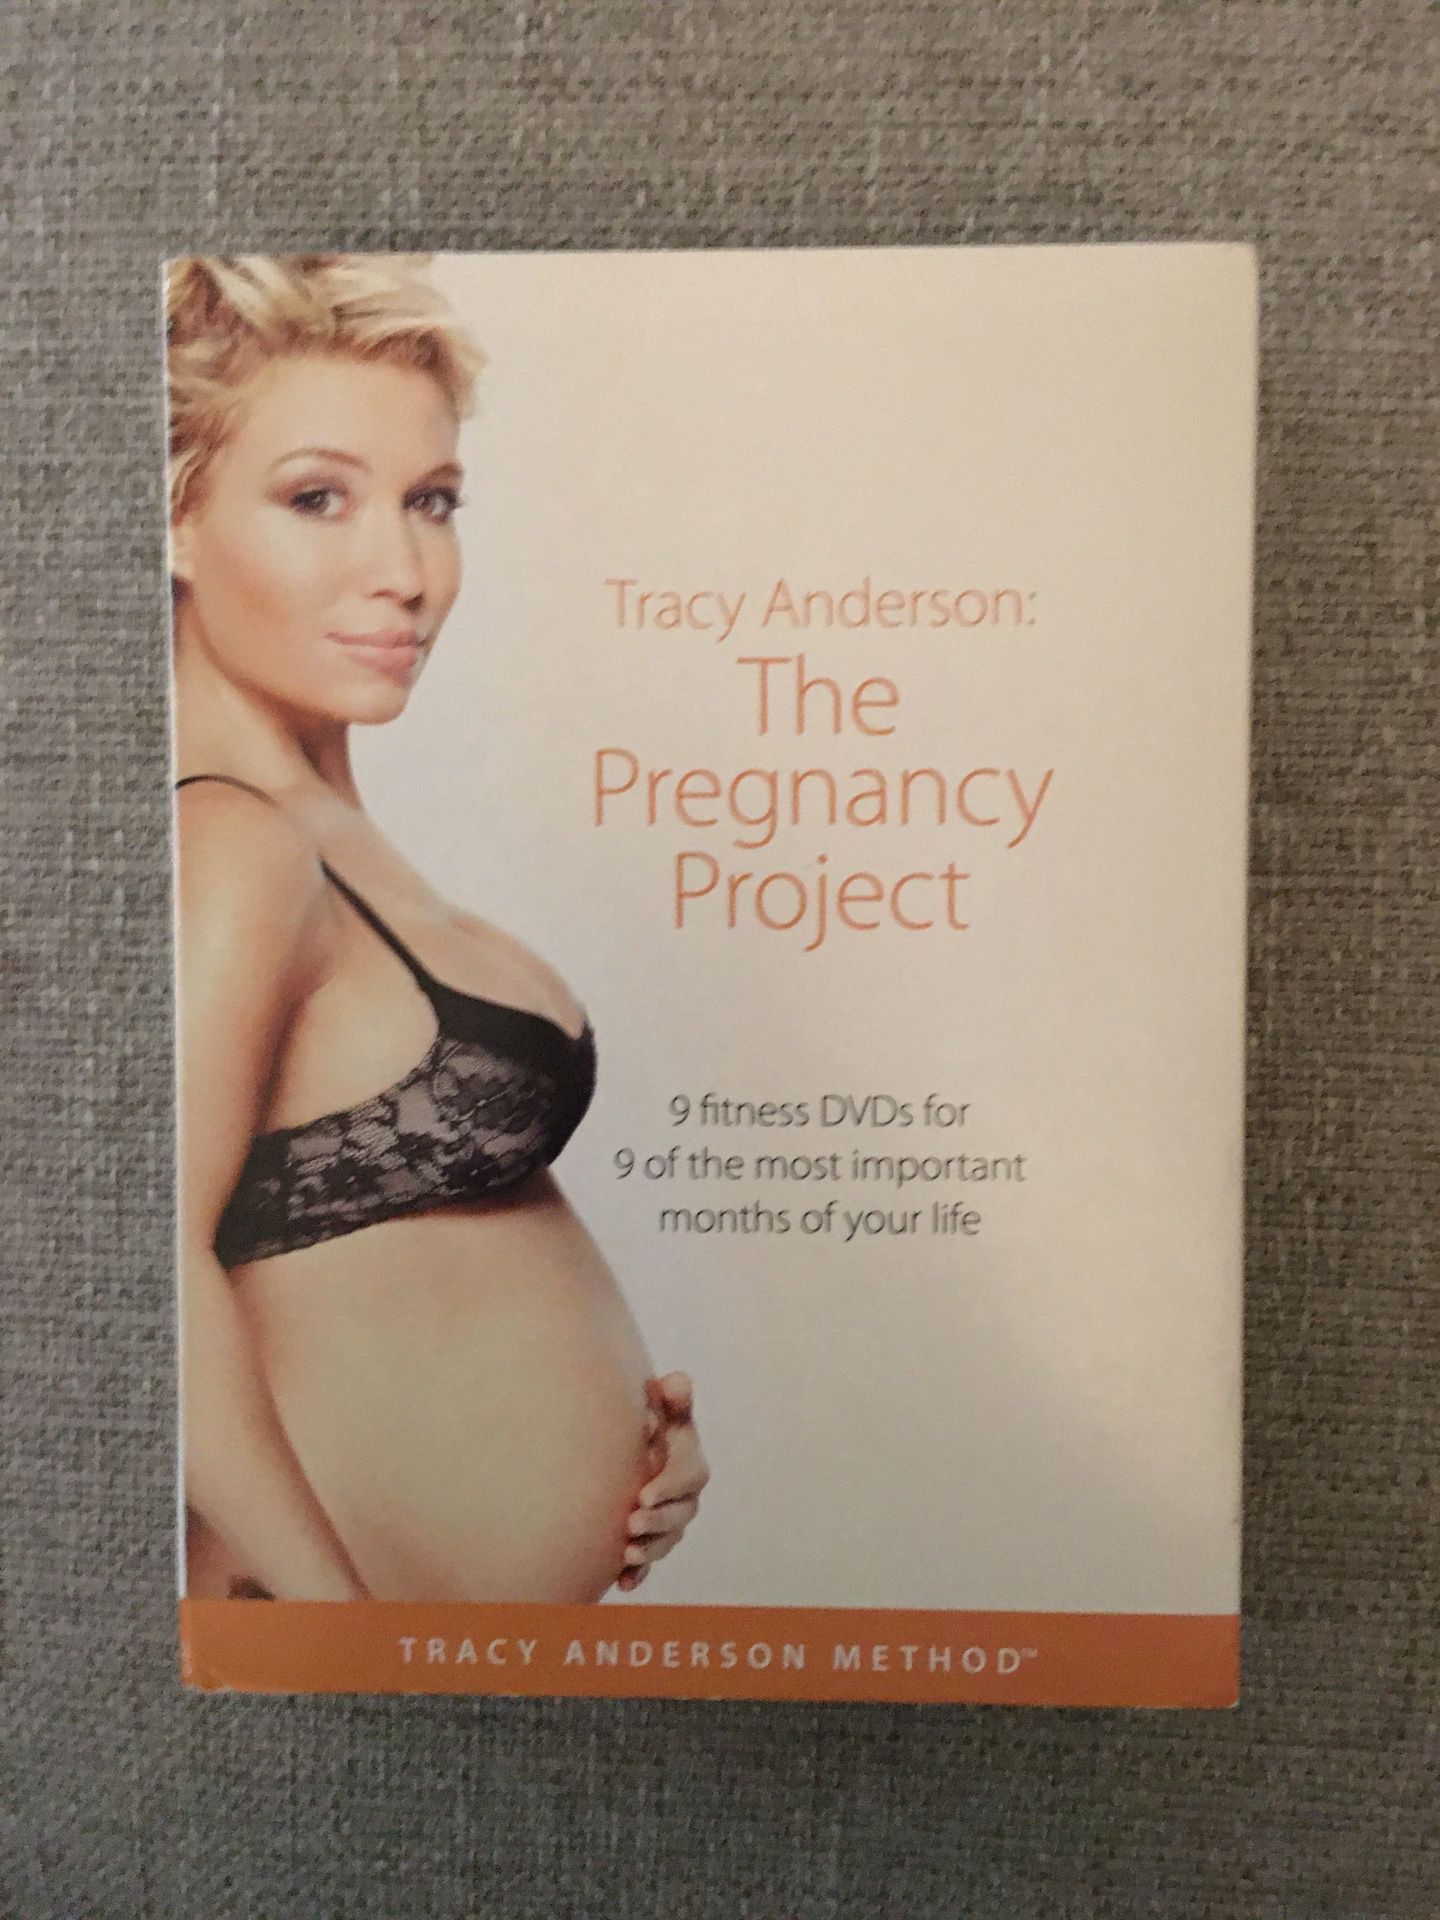 Tracy Anderson DVDs